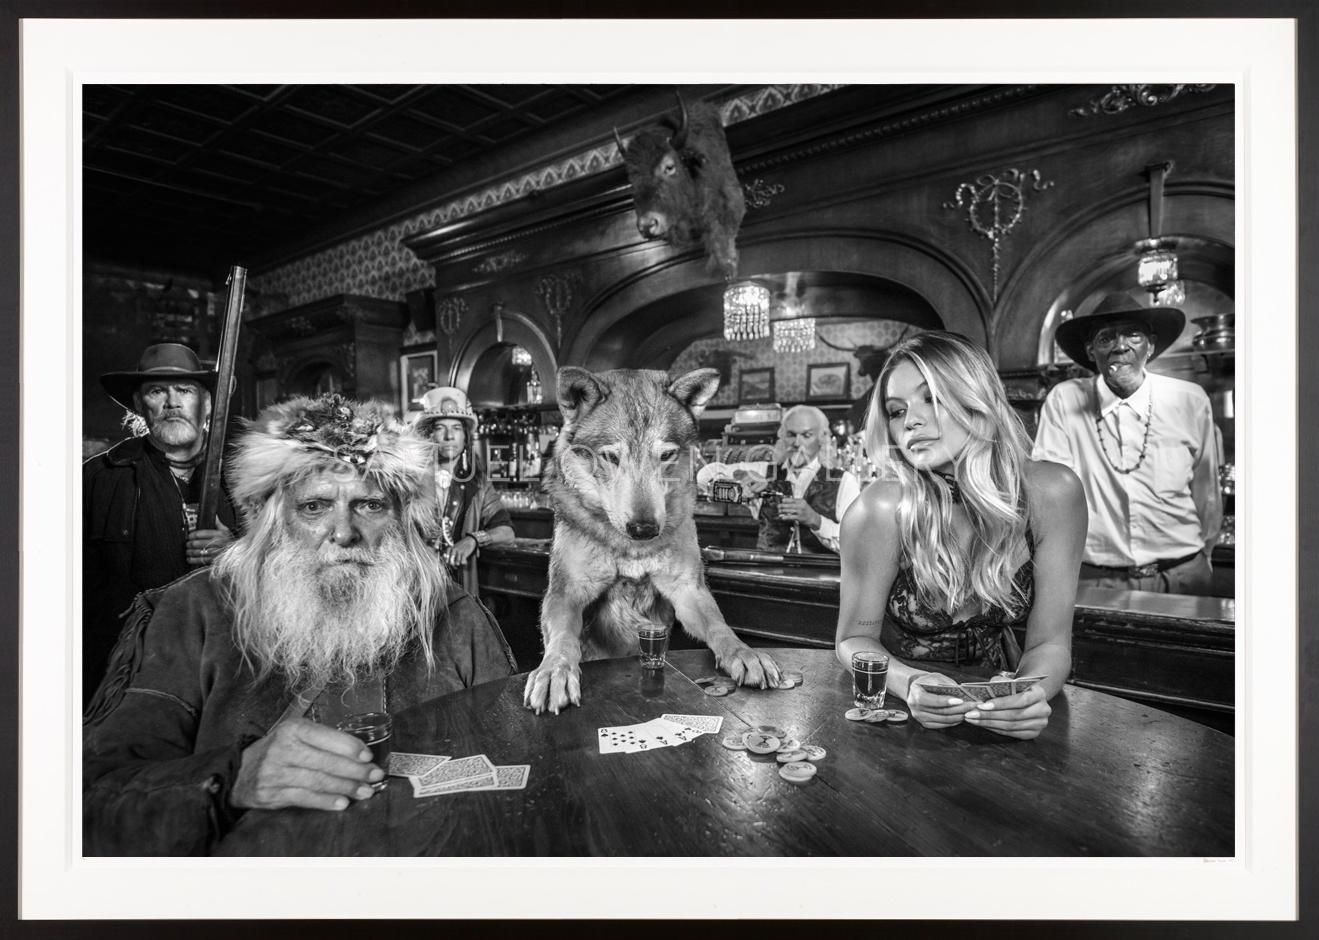 David Yarrow Black and White Photograph - Aces and Eights / Sexy Framed Western Photo Josie Canseco in Montana Salloon